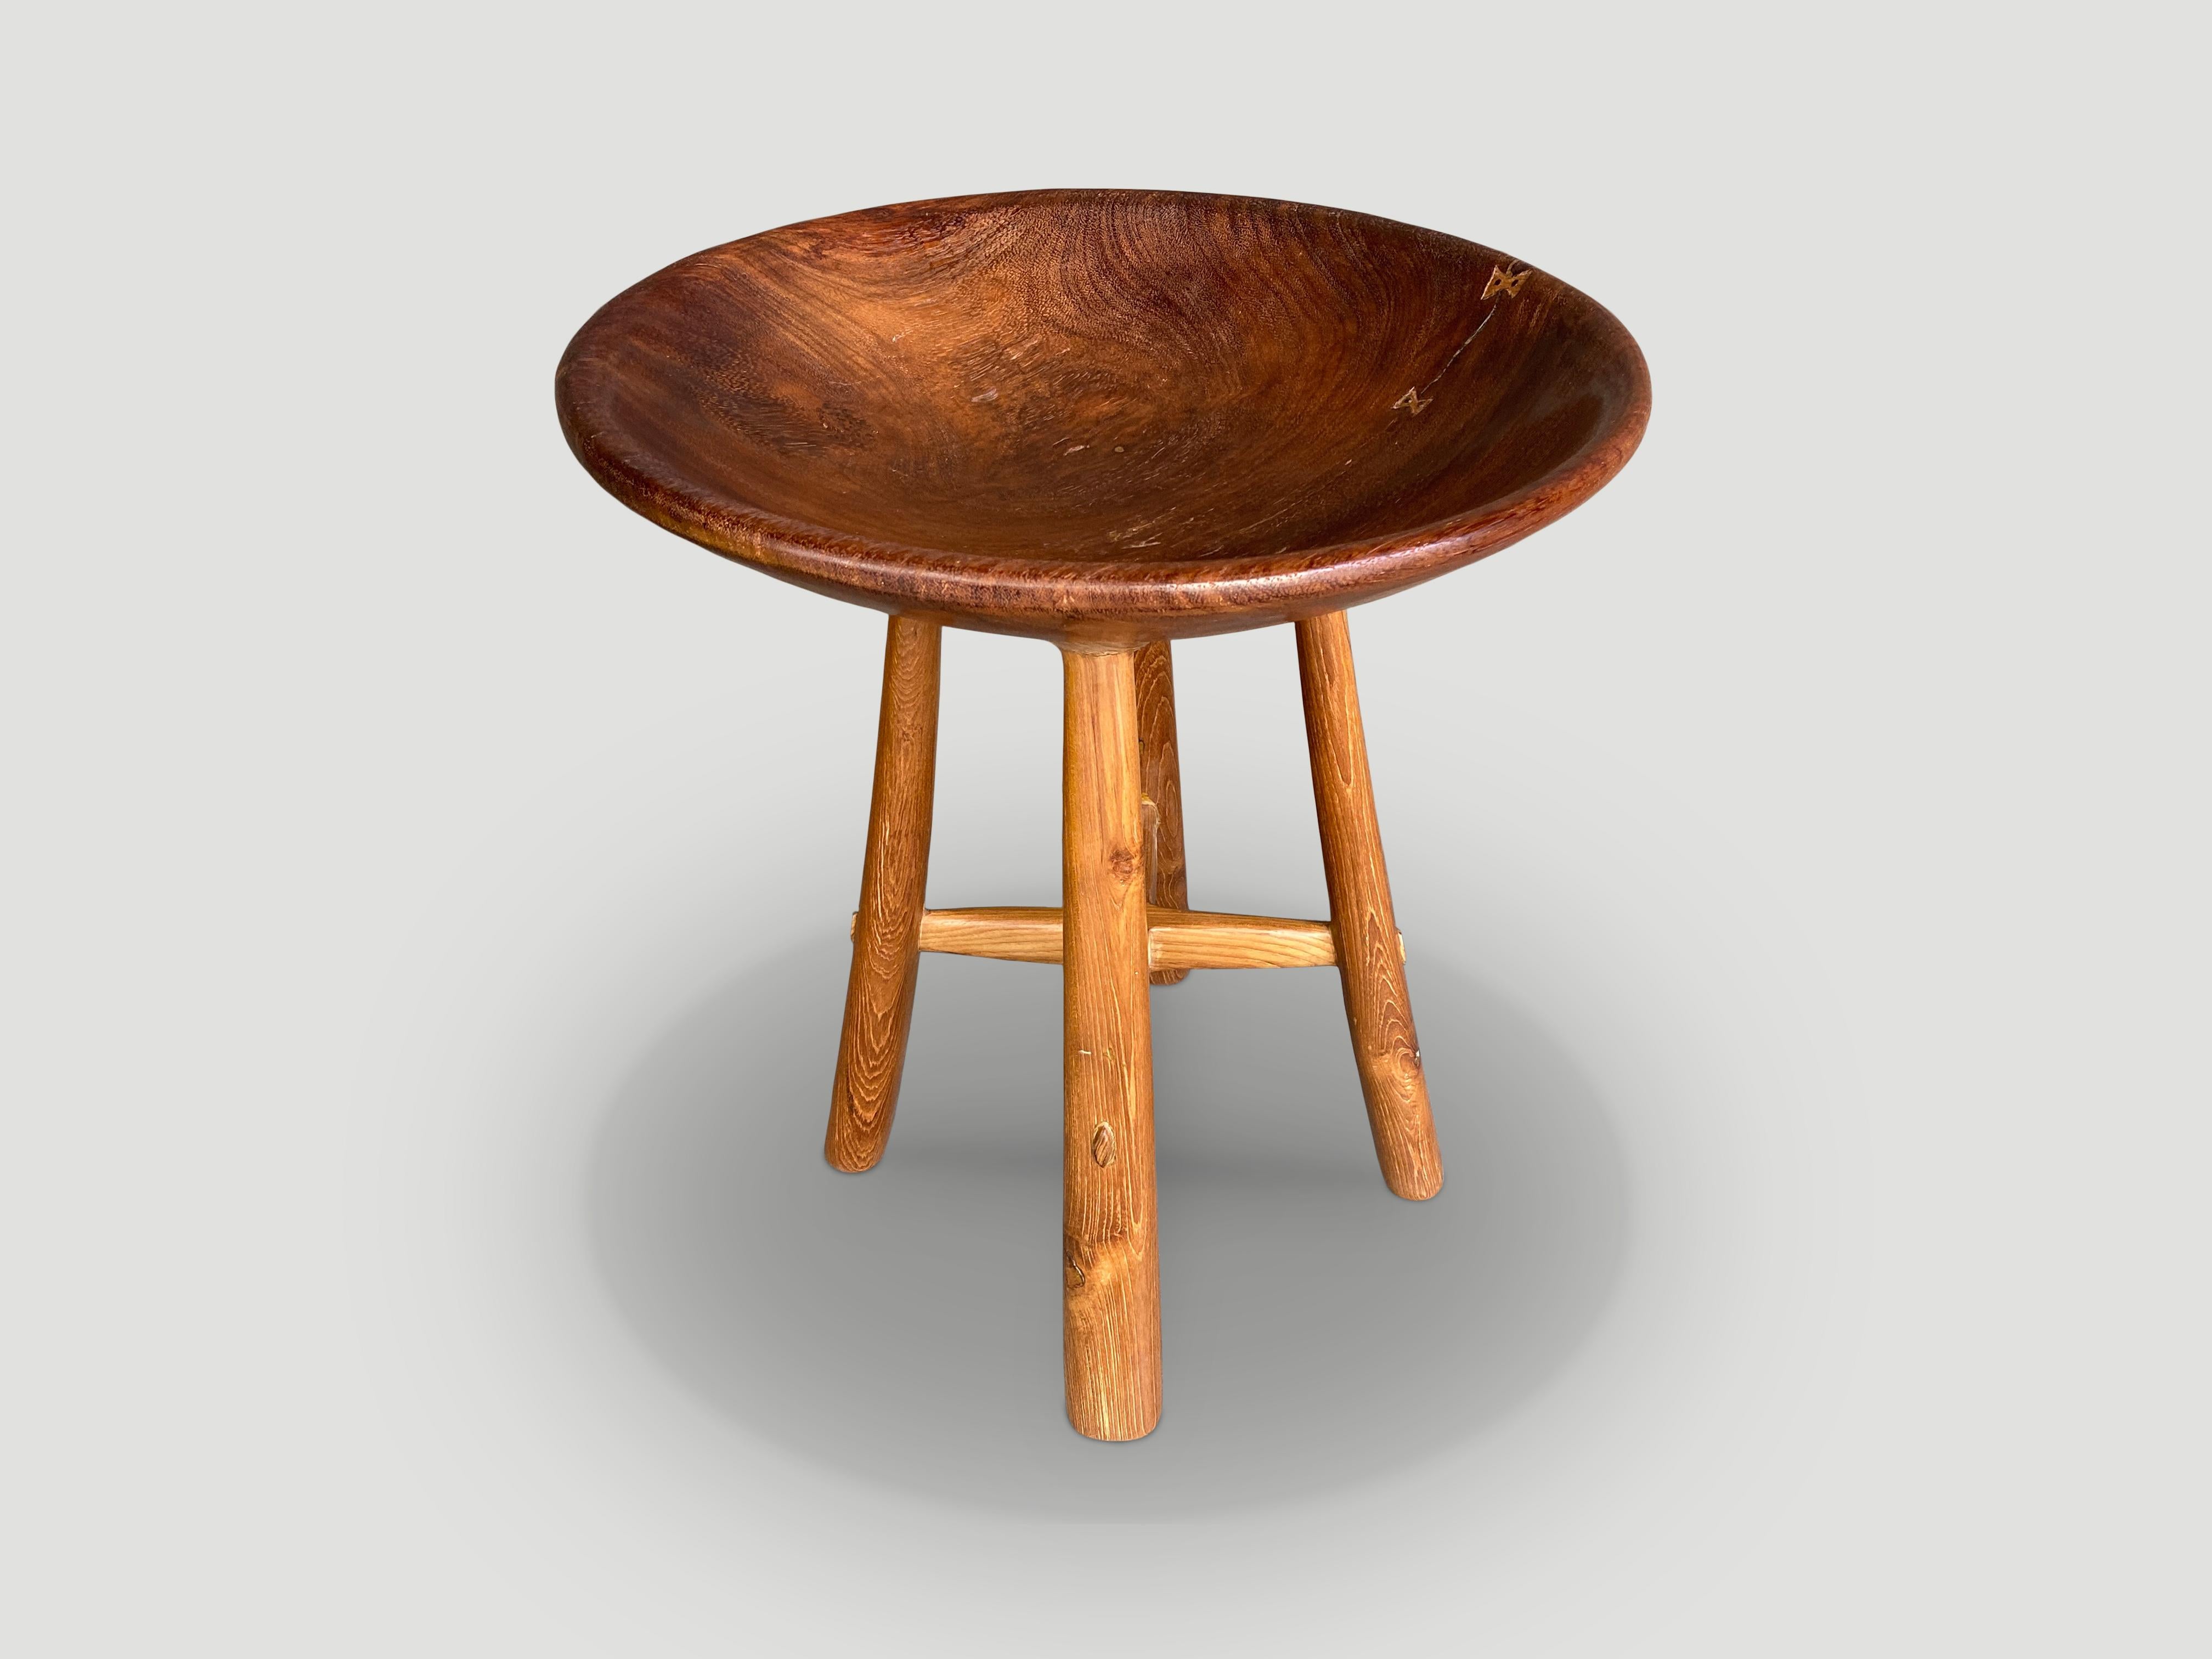 Introducing the mid-century Couture Collection. Furniture constructed by hand from start to finish. A beautiful century old Merbau deep wood bowl from Sumatra, is polished with a natural oil revealing the stunning wood grain. We added mid century